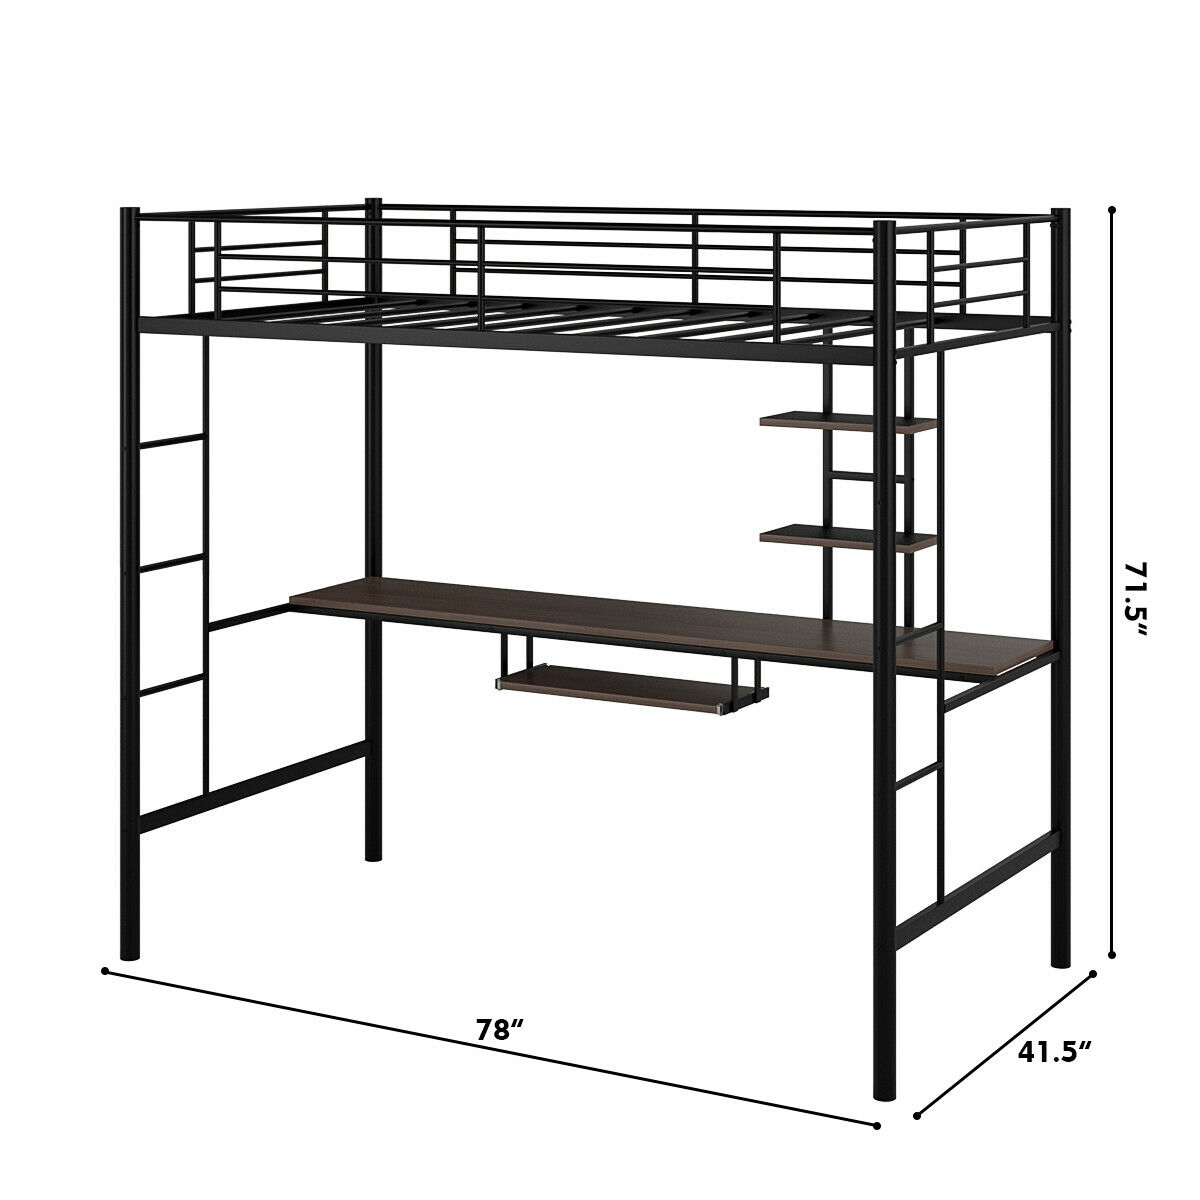 Costway Twin Size Loft Bunk Bed Metal, Twin Size Bunk Beds